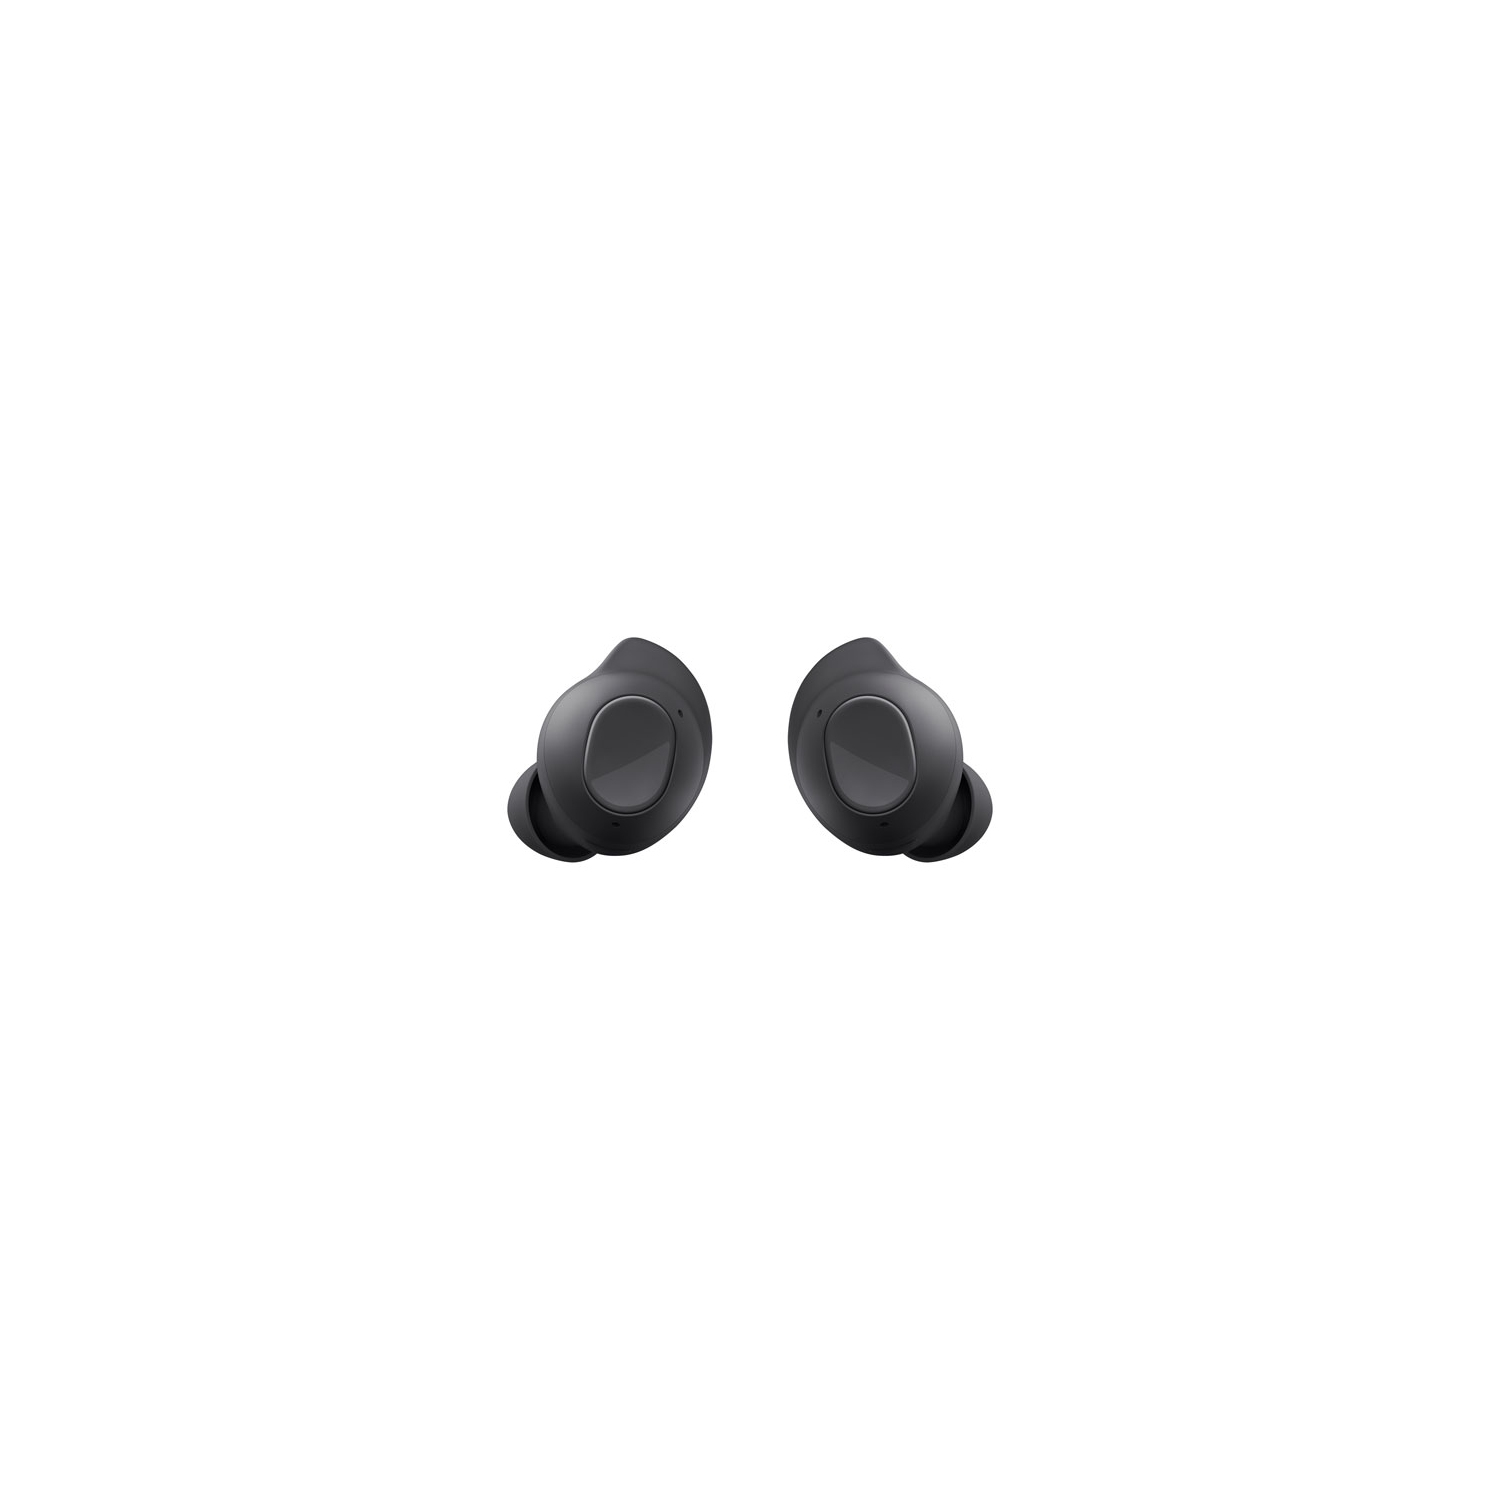 Refurbished (Excellent) - Samsung Galaxy Buds FE IE Noise Cancelling True Wireless Earbuds - Graphite